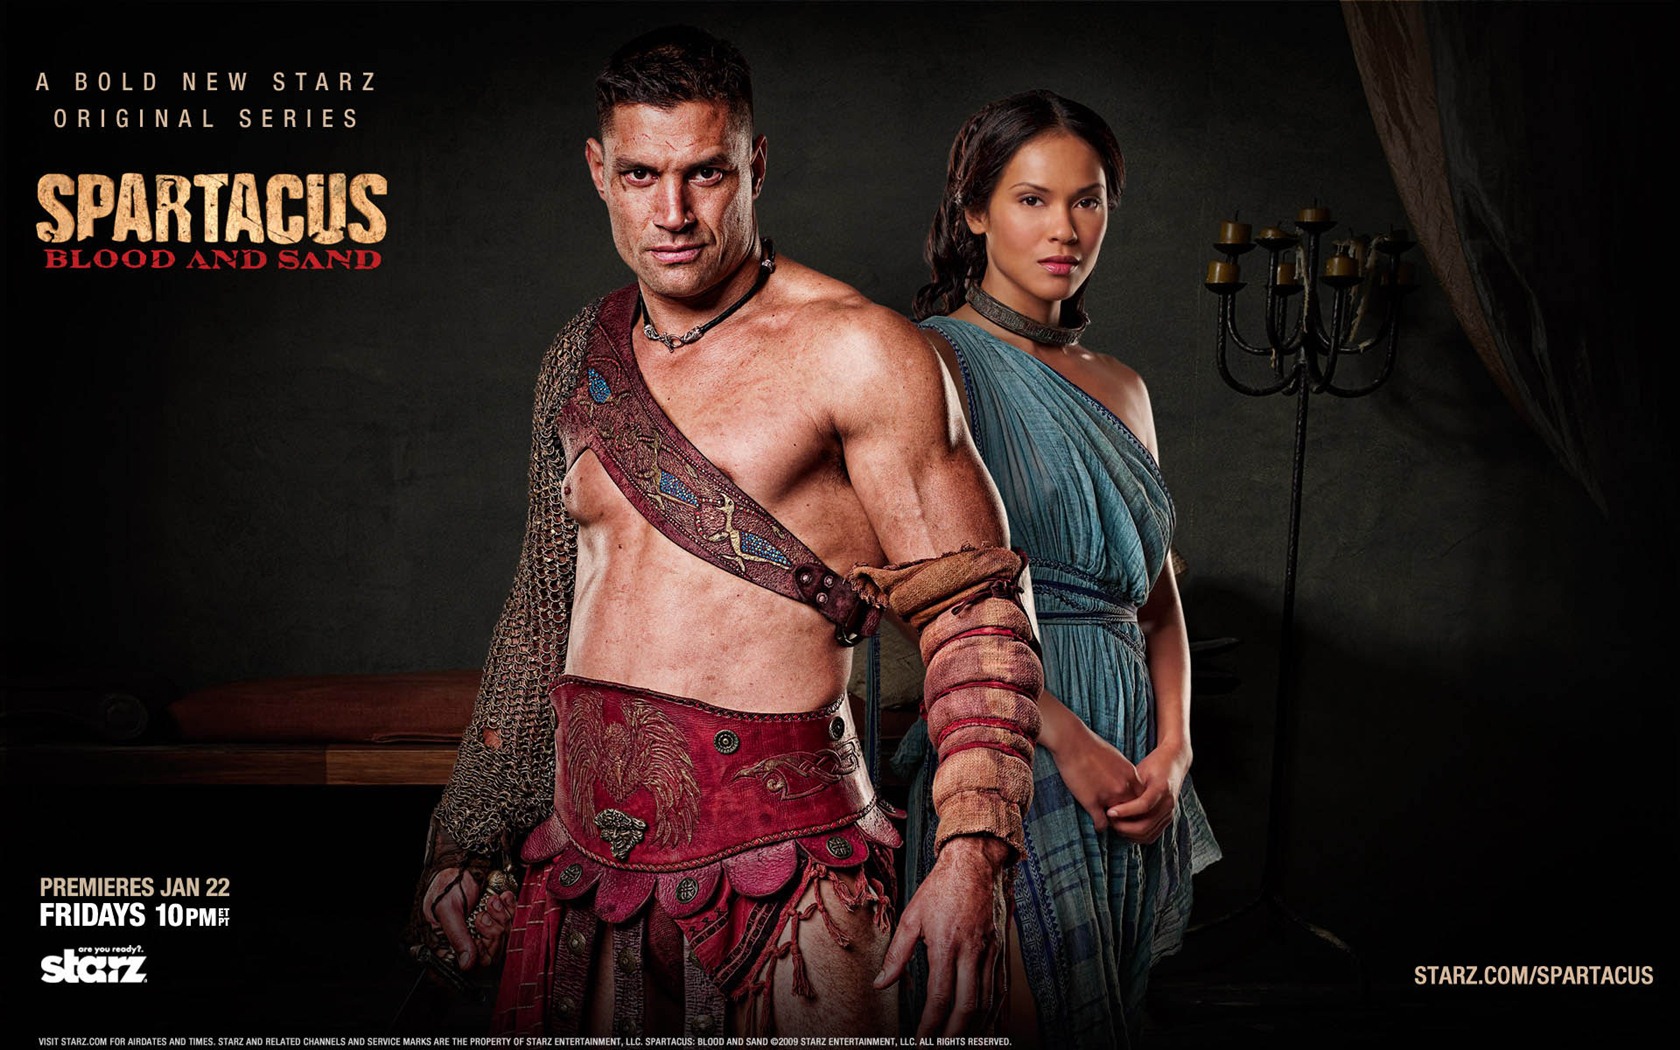 Spartacus: Blood and Sand HD Wallpaper #4 - 1680x1050